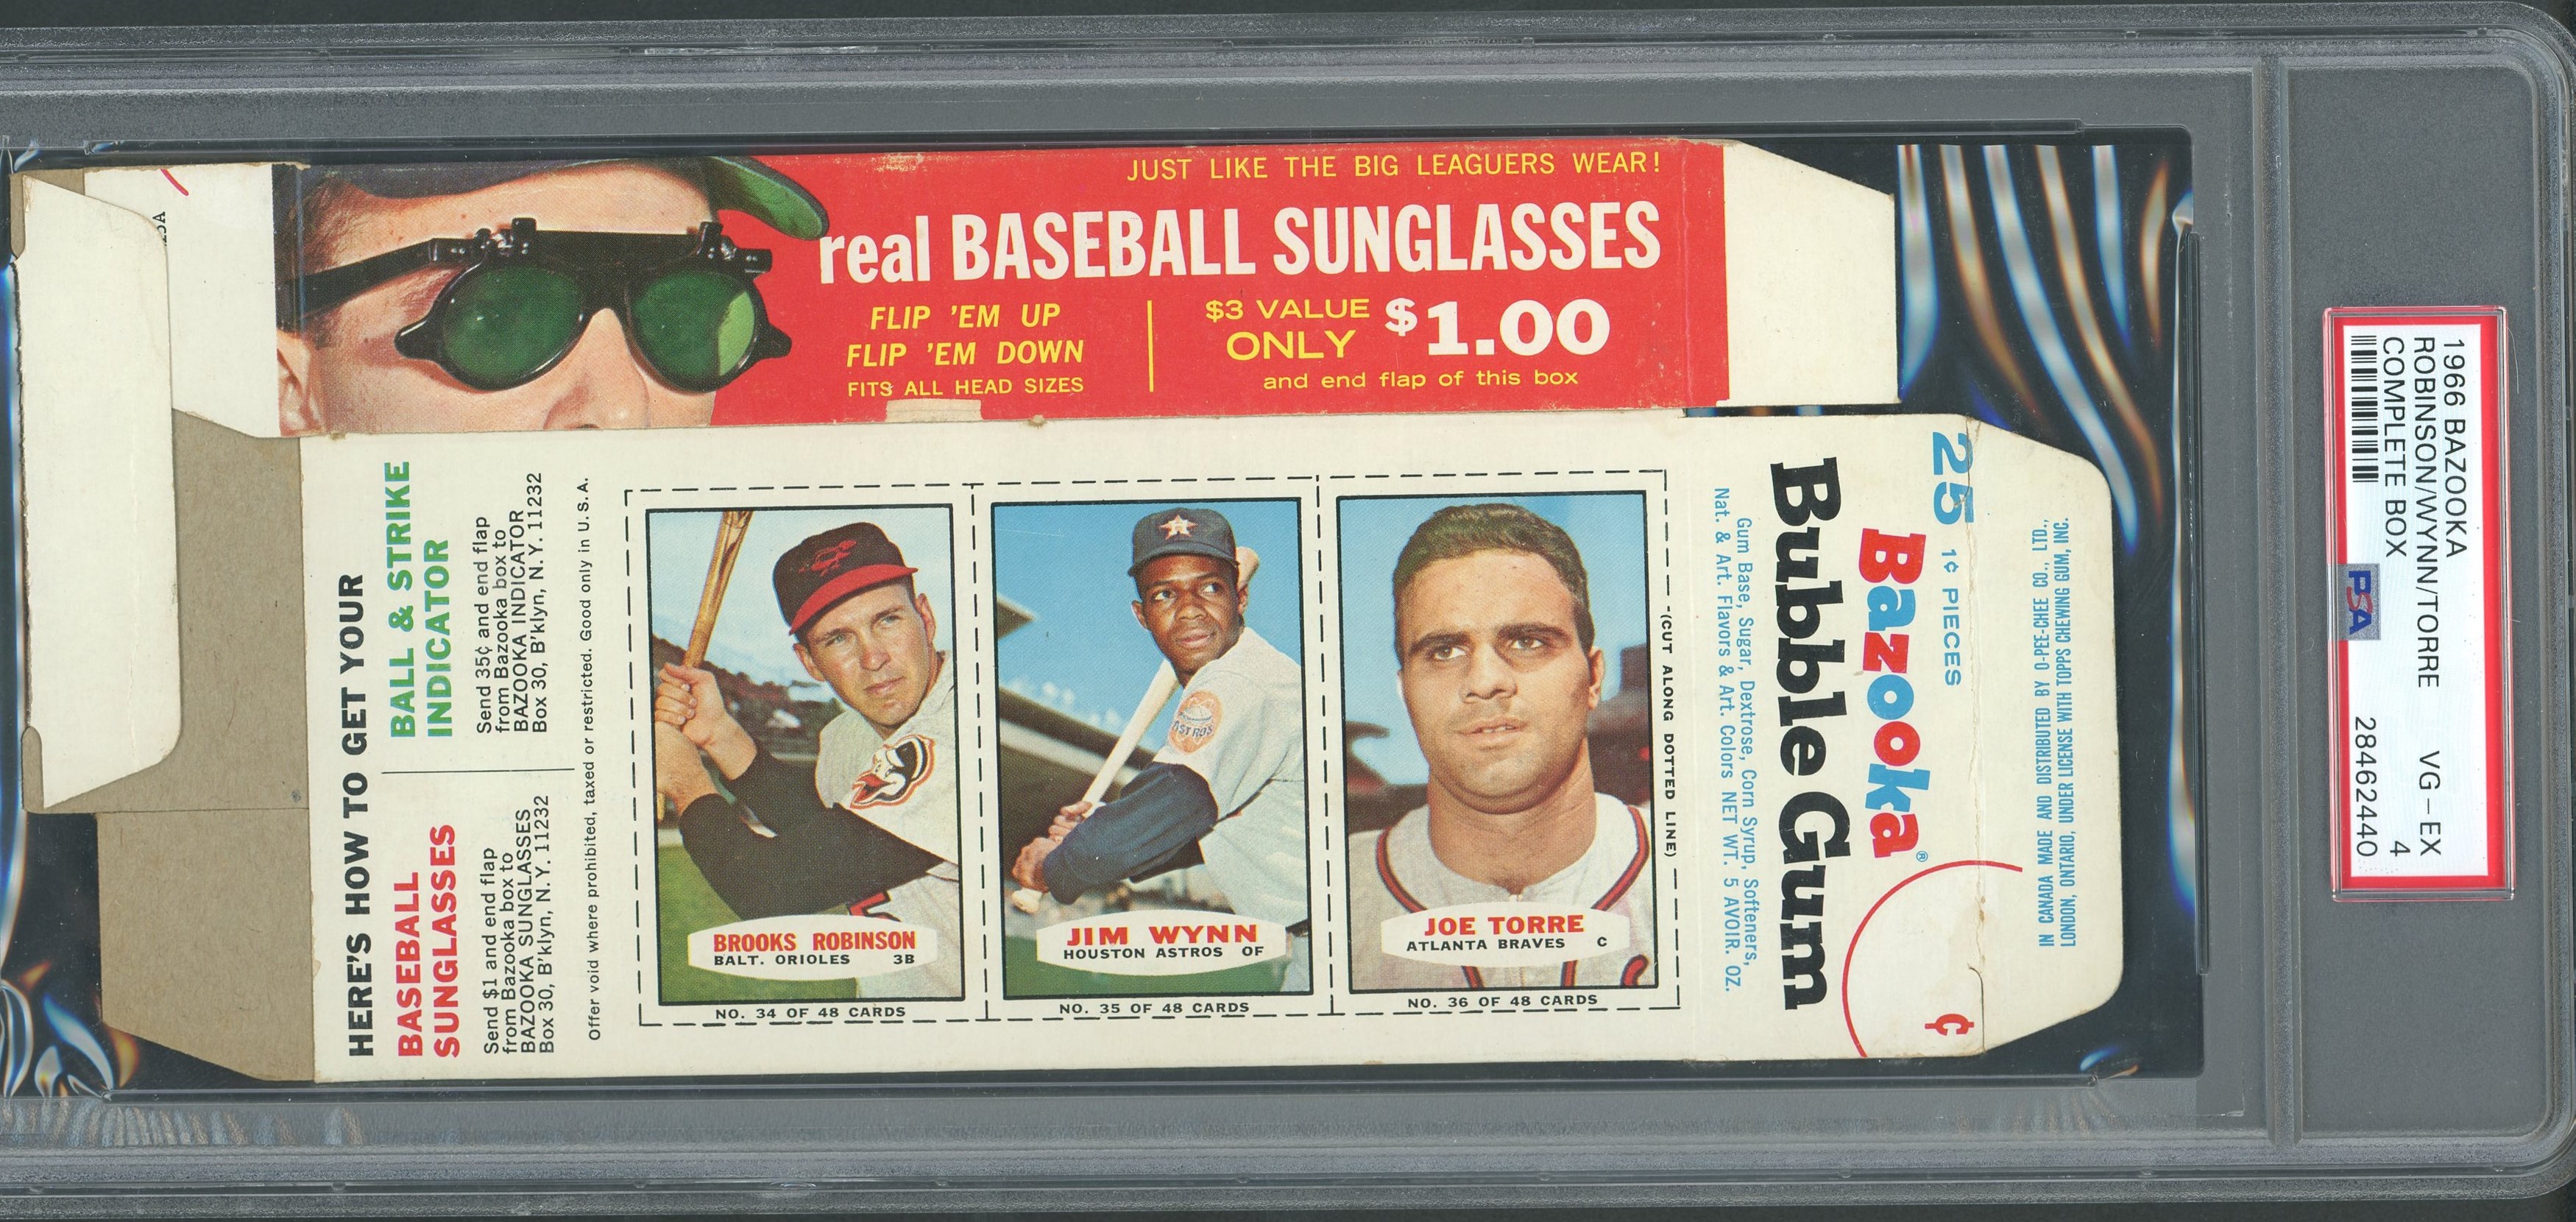 Baseball and Trading Cards - 1966 Bazooka Complete Box with Brooks Robinson and Joe Torre - PSA VG-EX 4